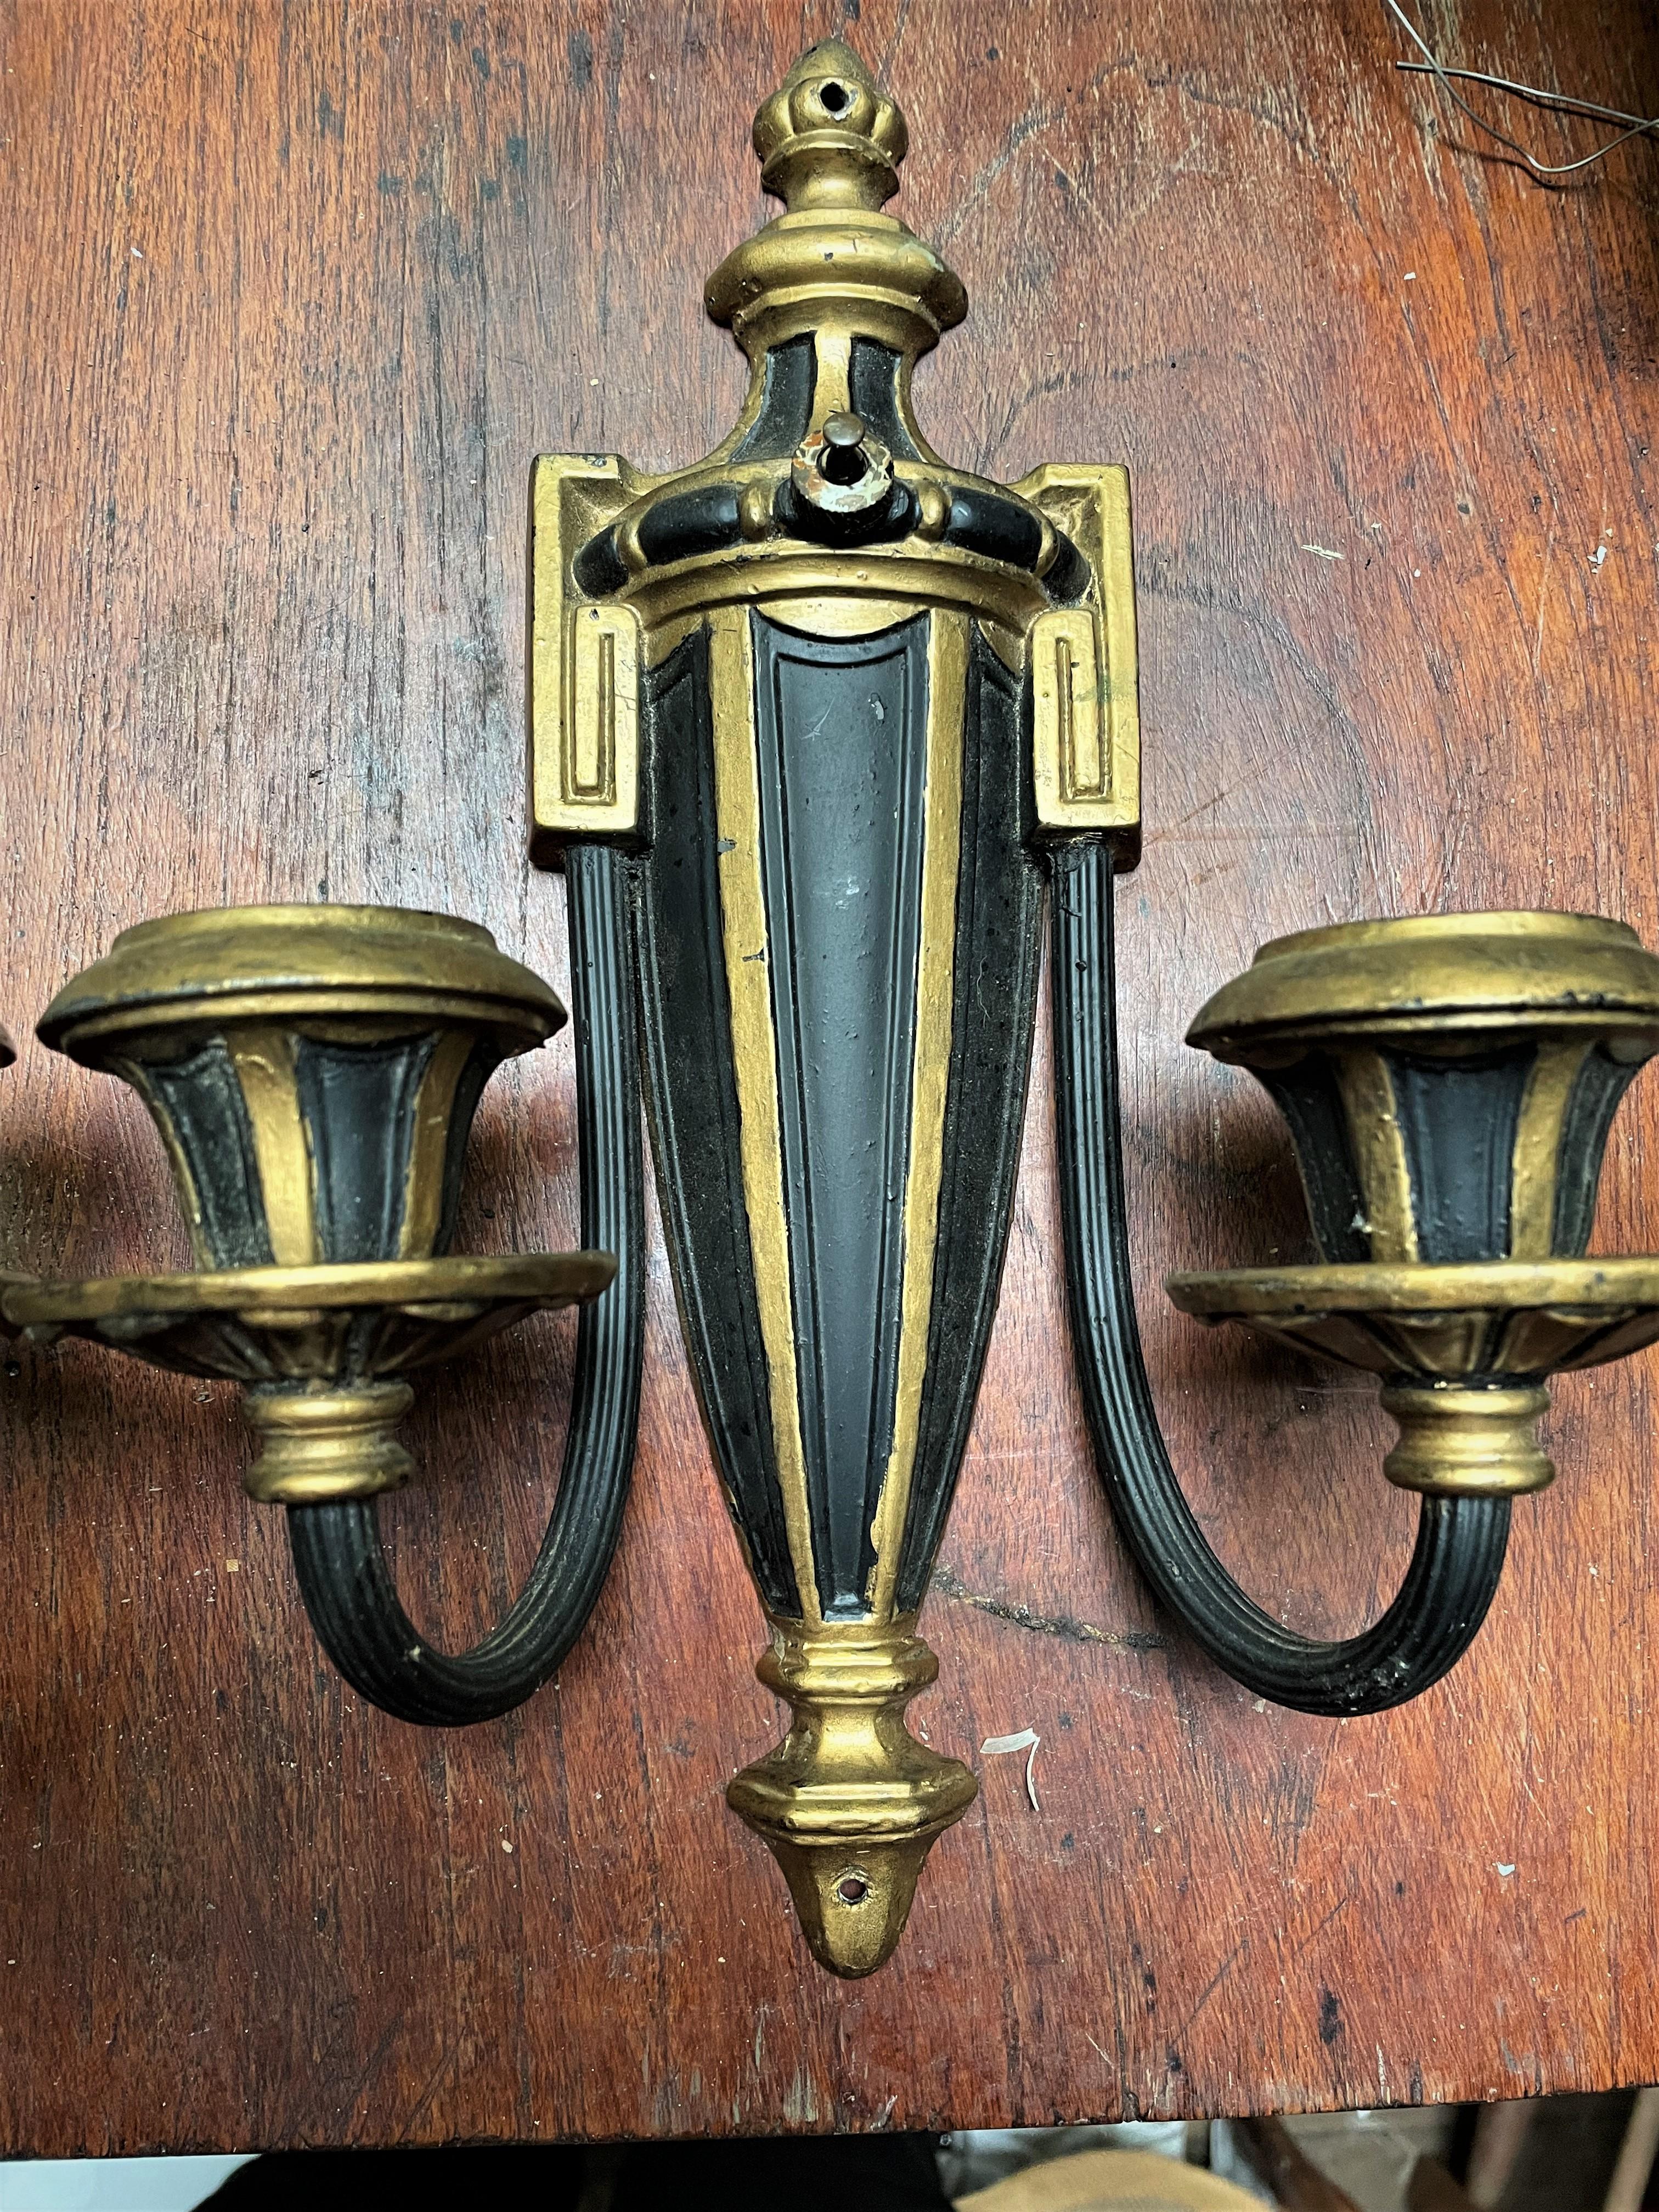 This is a great looking pair of neoclassical style sconces with a streamlined urn shape in the center and Greek Key designs where the arms meet the urn. The sconces were once electrified, but are not now They can certainly be wired again and still